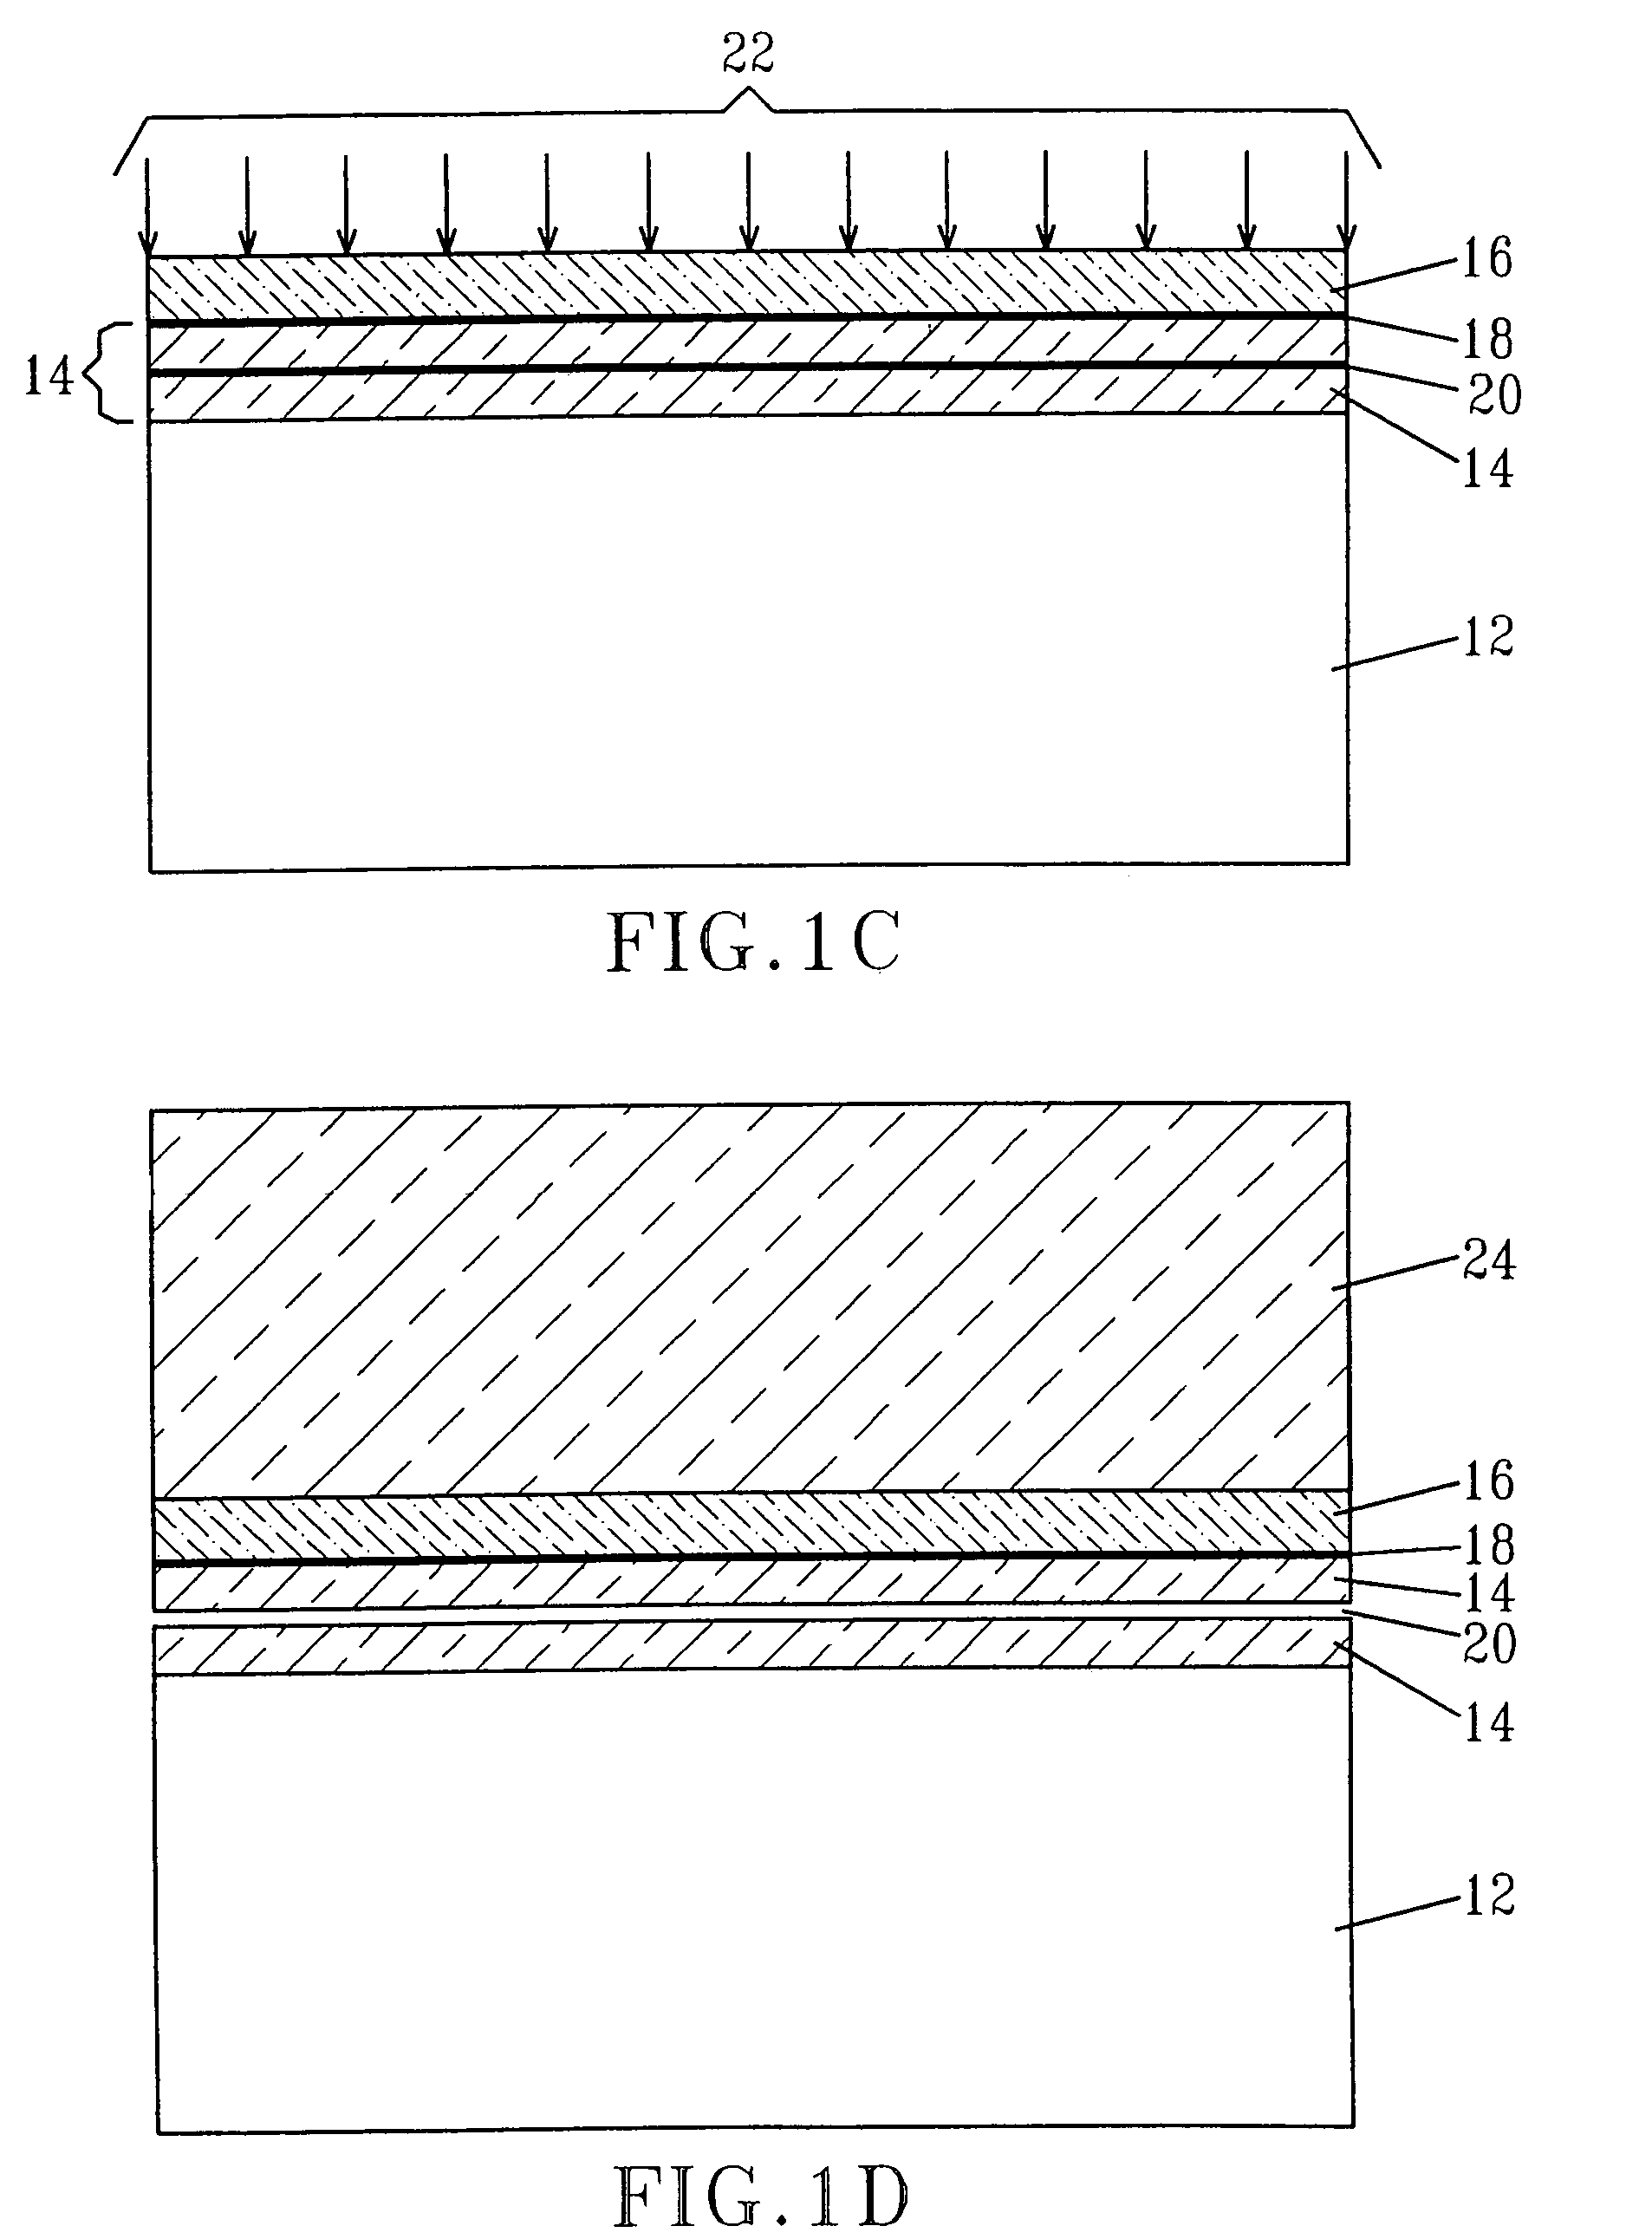 Method of creating defect free high Ge content (&gt;25%) SiGe-on-insulator (SGOI) substrates using wafer bonding techniques